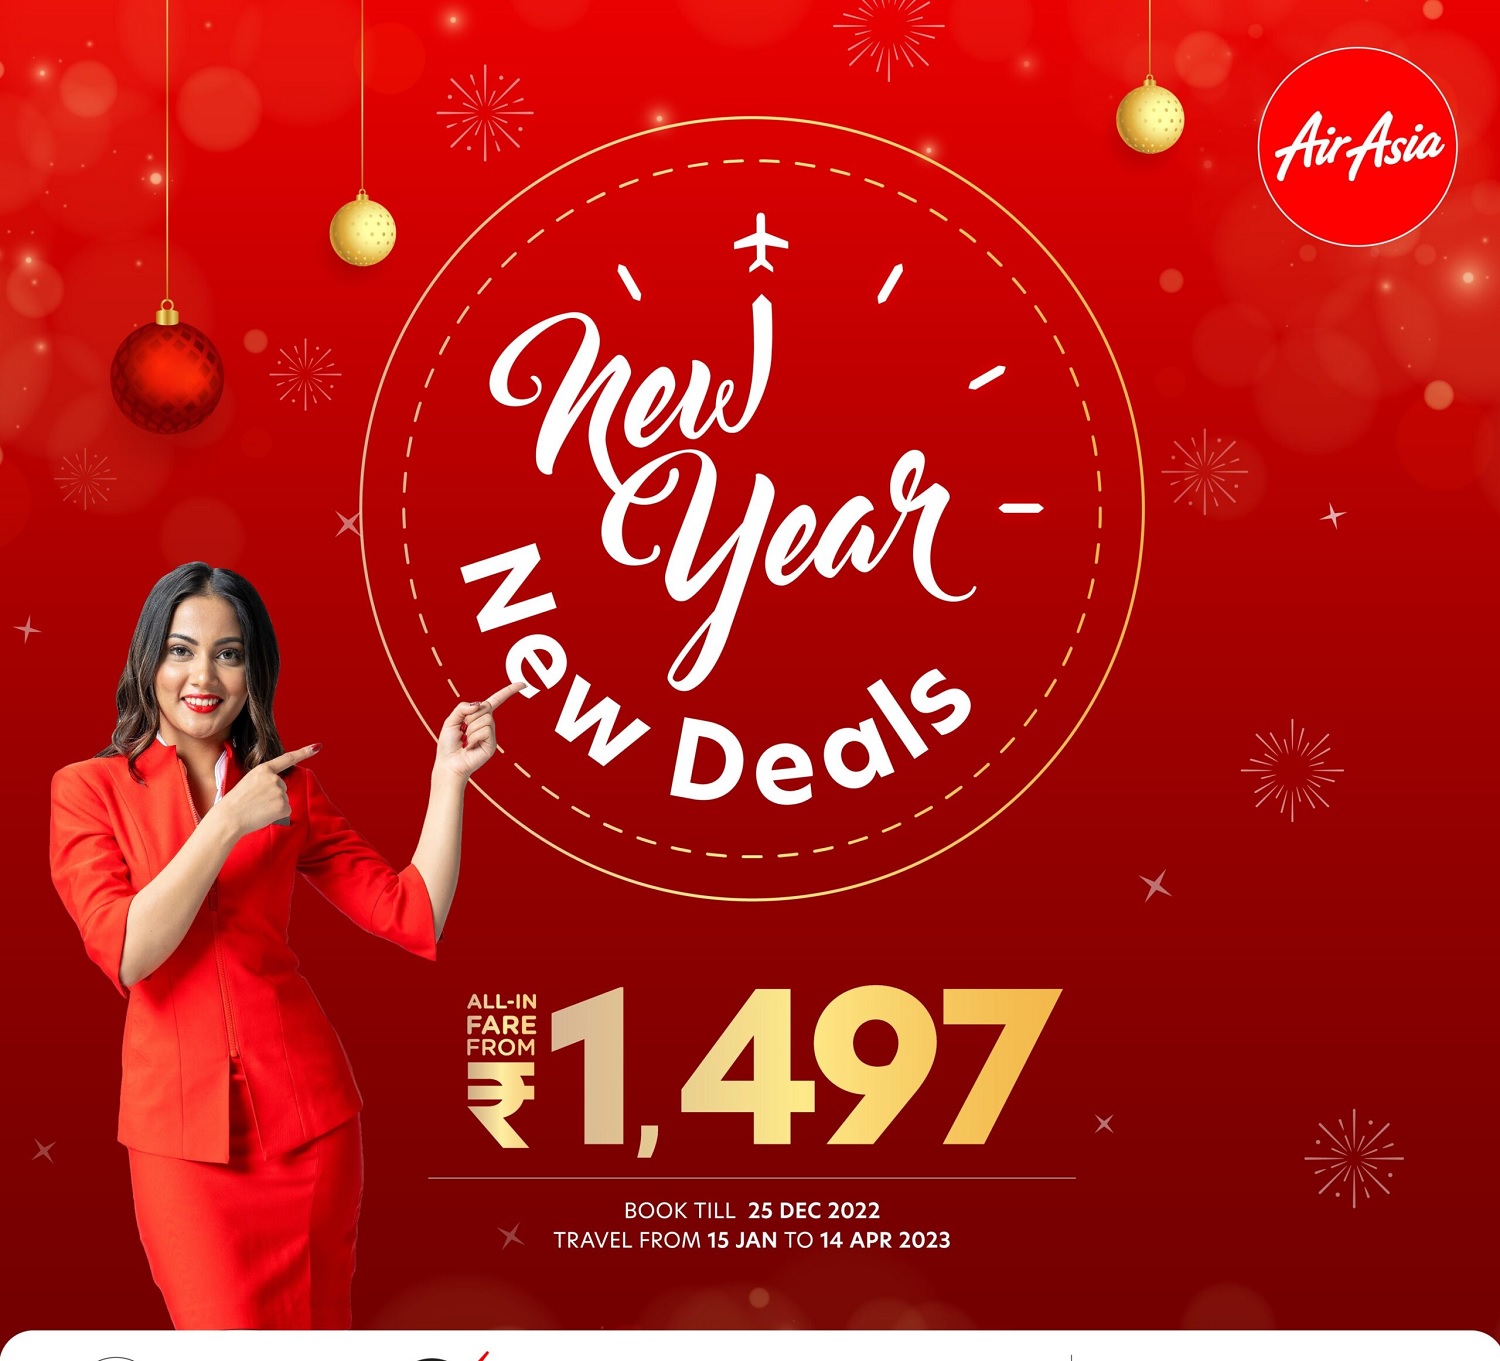 AirAsia India: New Year, New Deals’ Sale